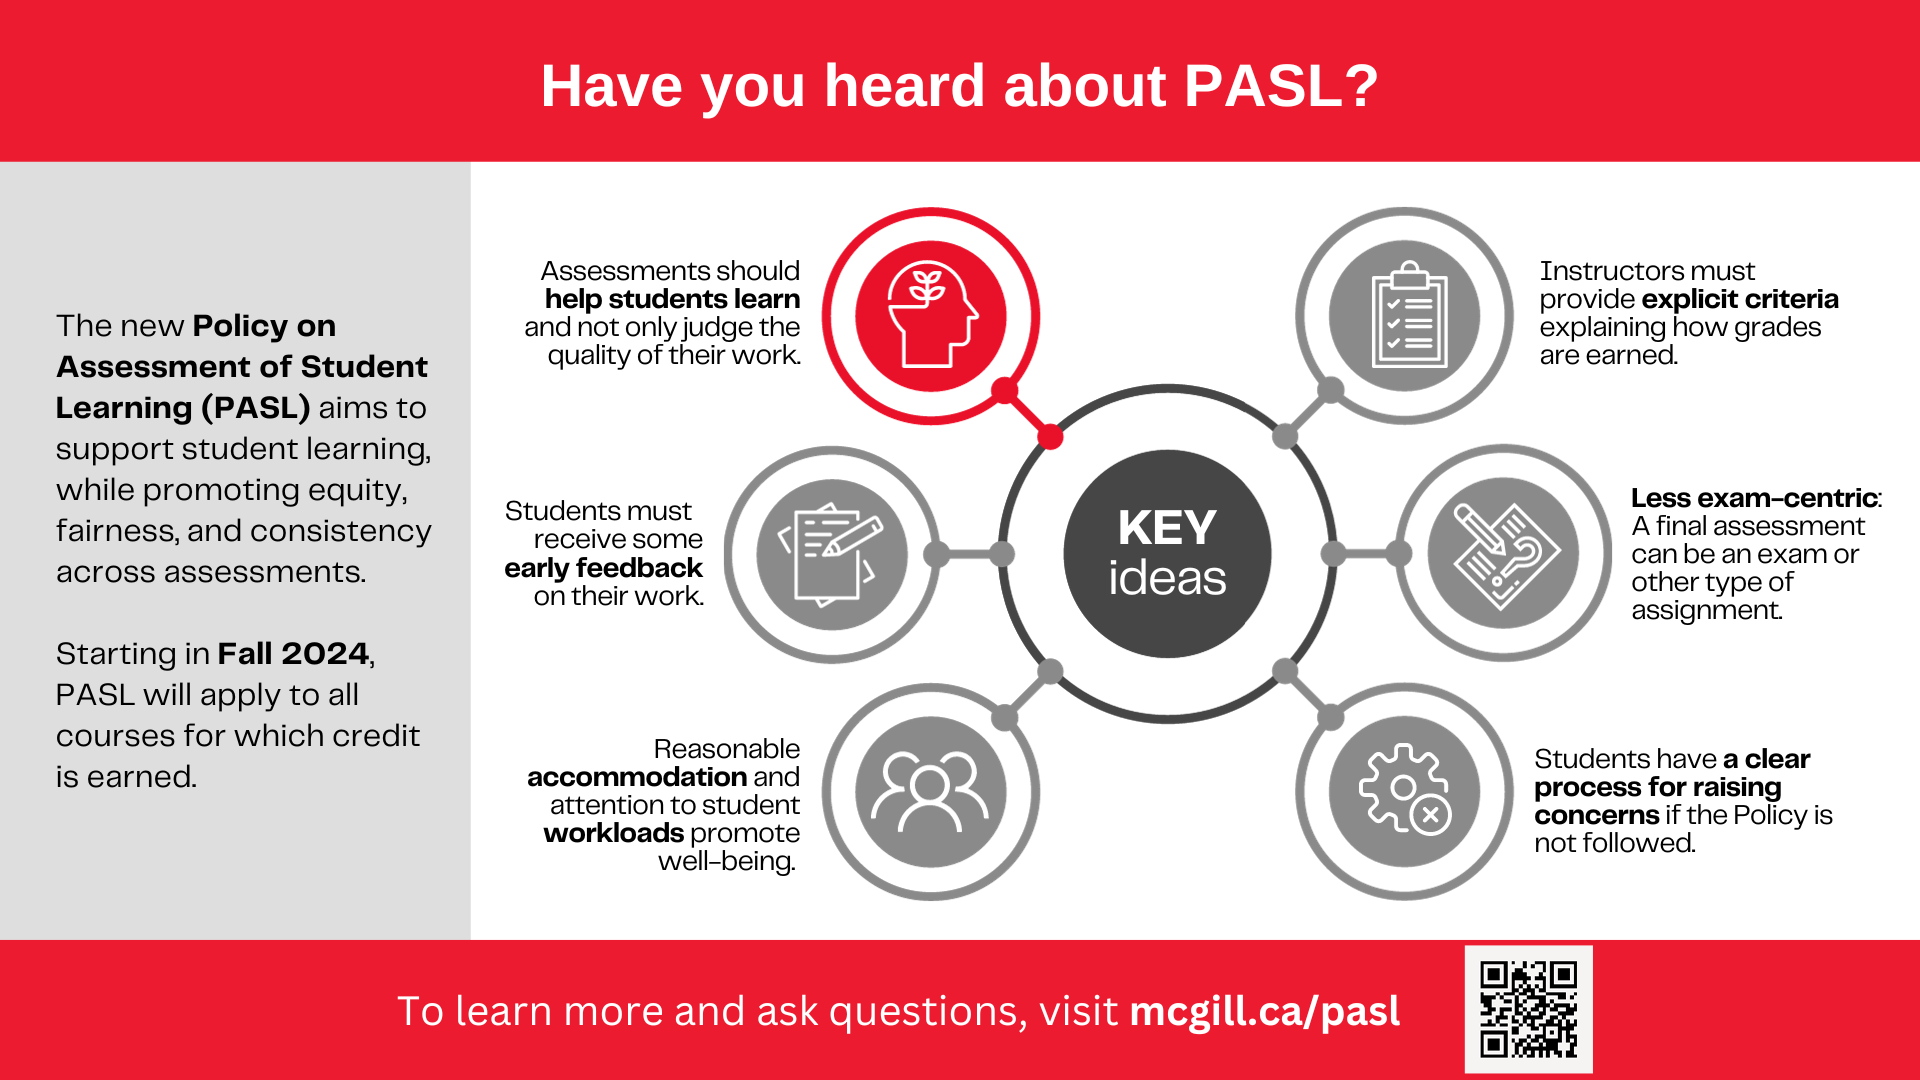 Have you heard about PASL? Infographic with icons and text describing some main policy points. 